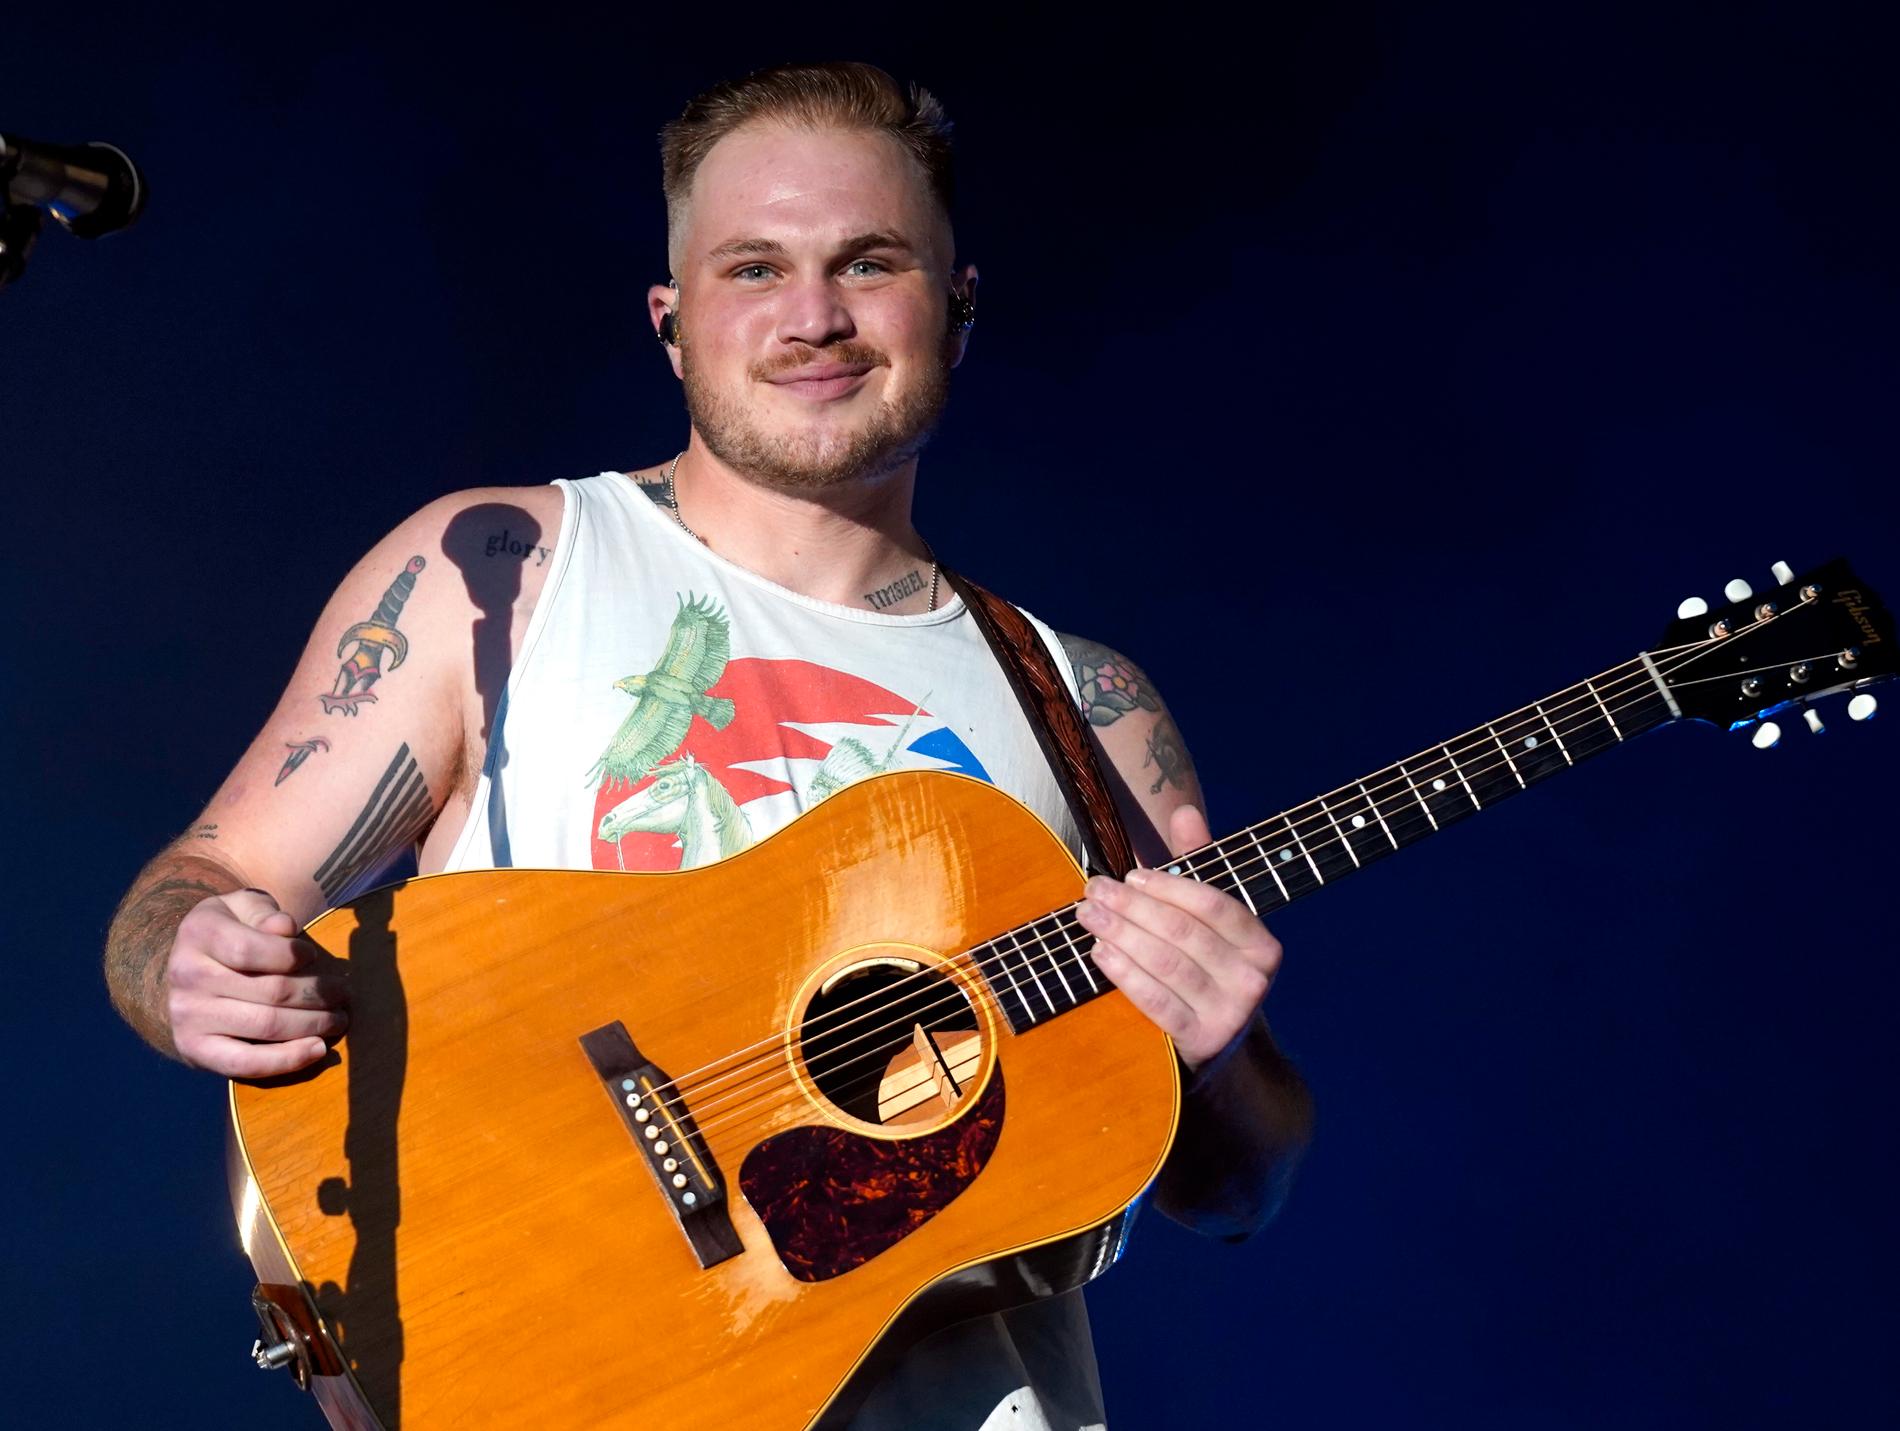 Country music star Zack Bryan arrested: – Crossing the line